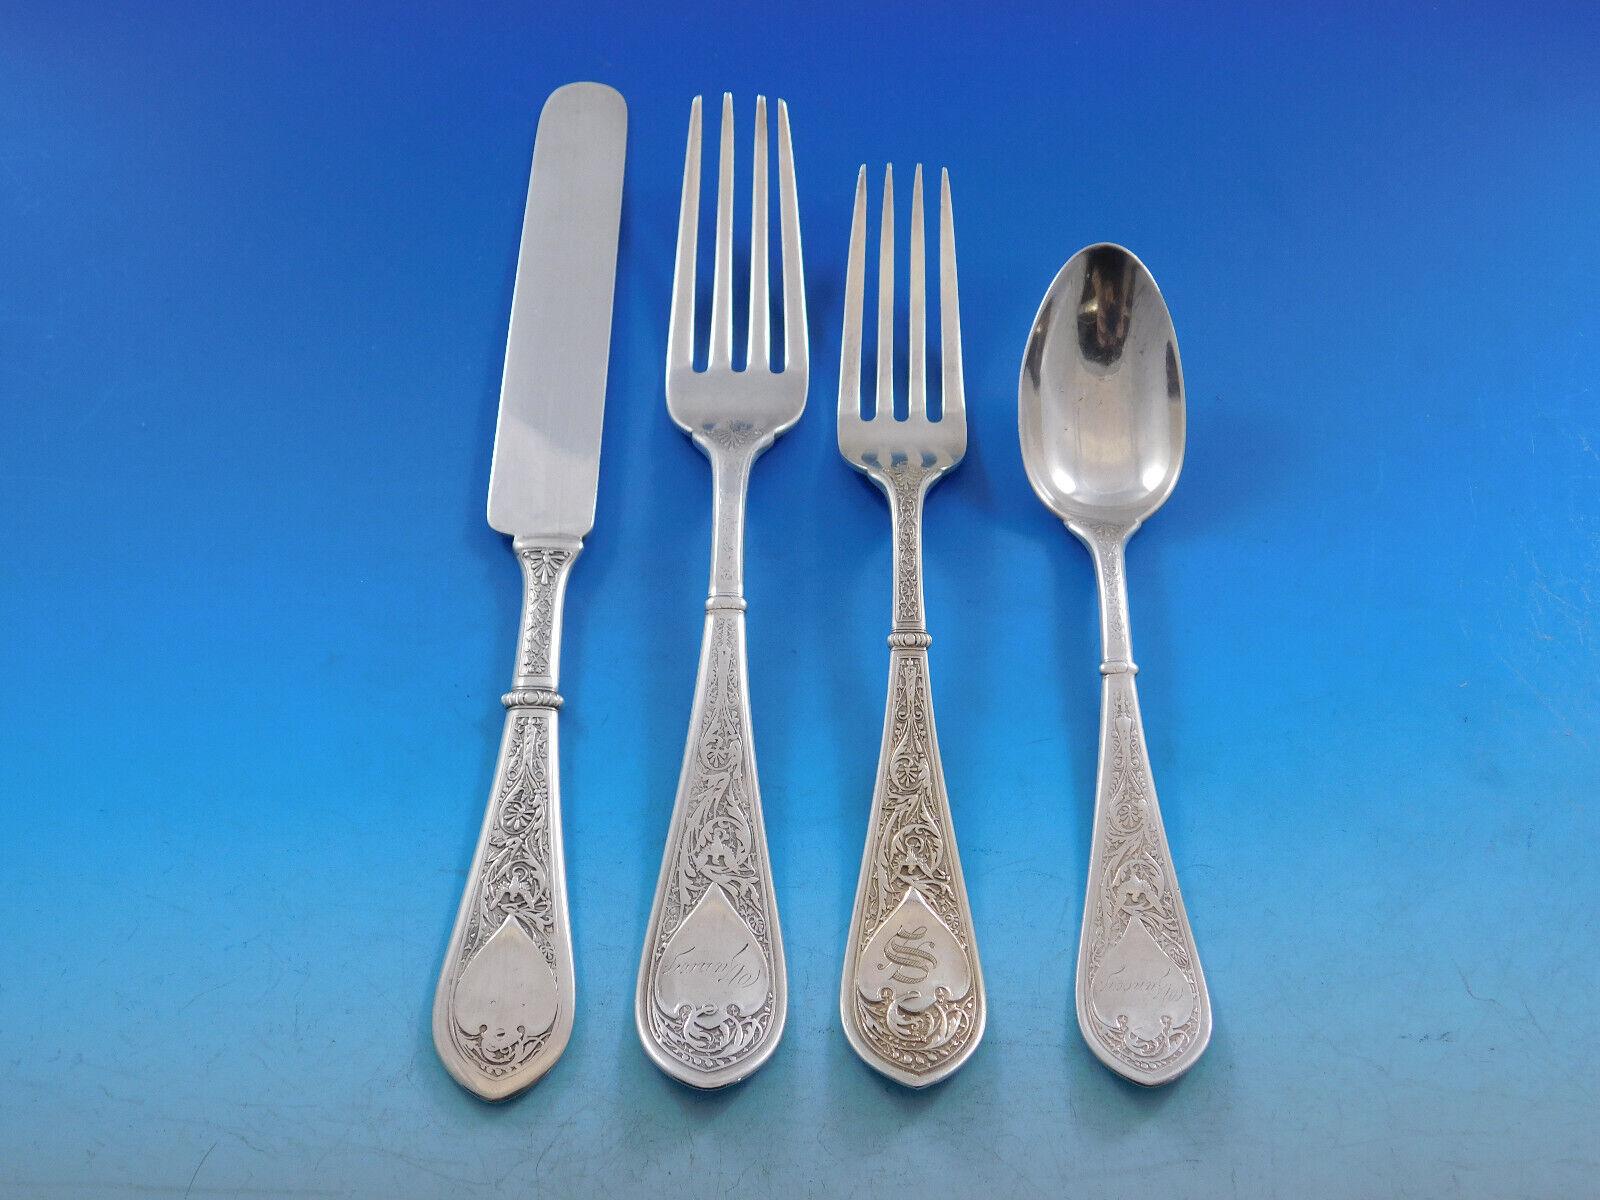 Rare early Raphael by Gorham, circa 1875, Sterling Silver Flatware set - 44 pieces. This set includes:

8 Knives, flat handle all-sterling, 8 3/8